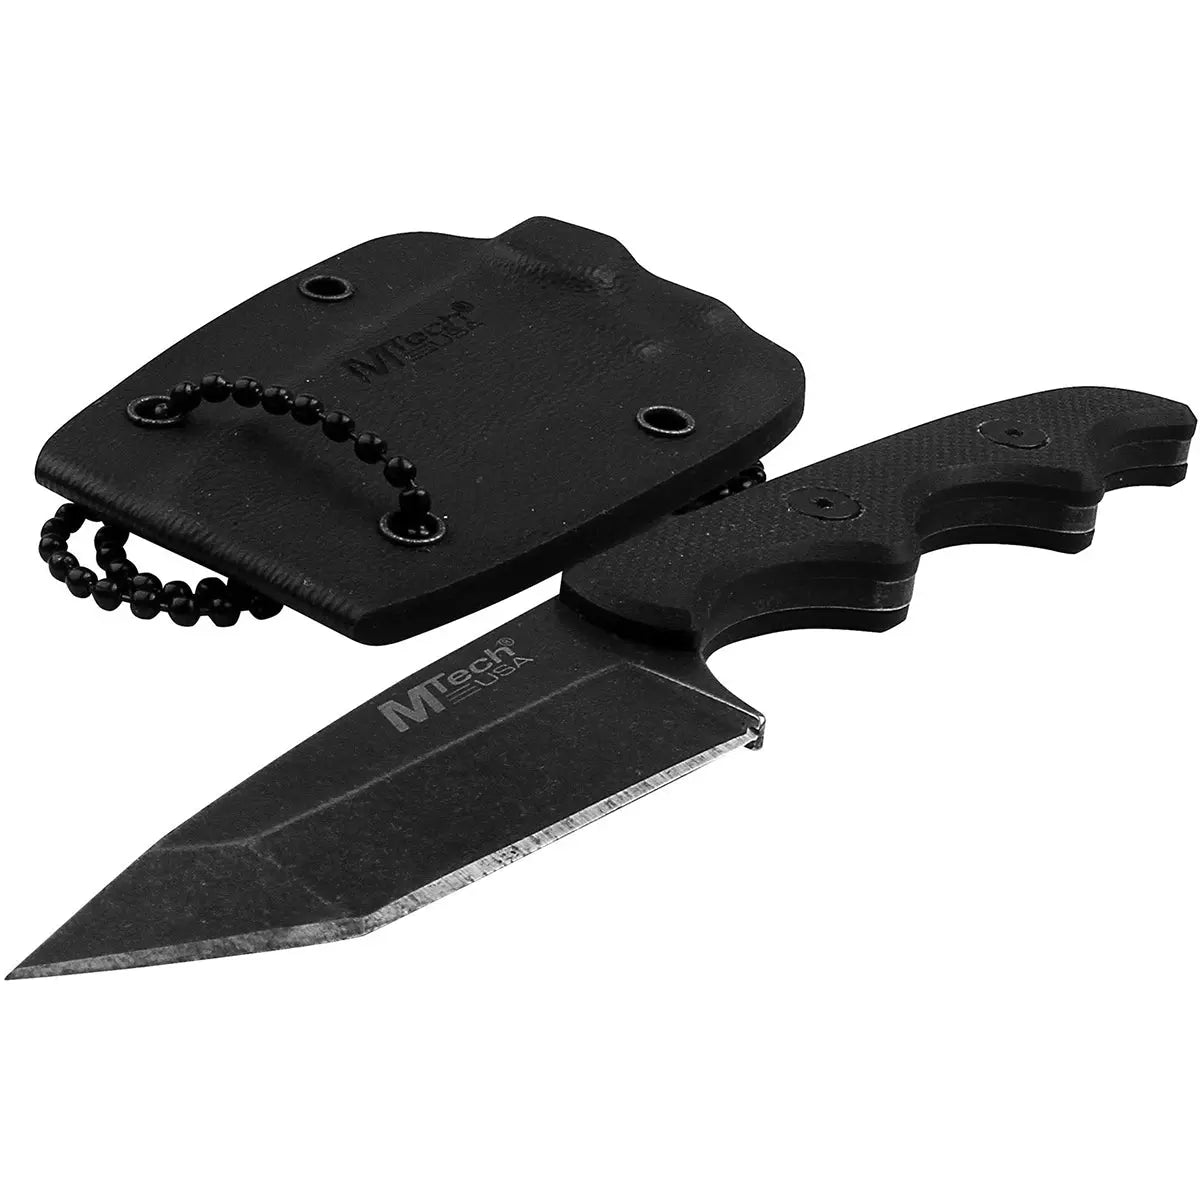 MTech USA Tactical Tanto Fixed Blade Combat Neck Knife, Stonewashed, MT-673 M-Tech